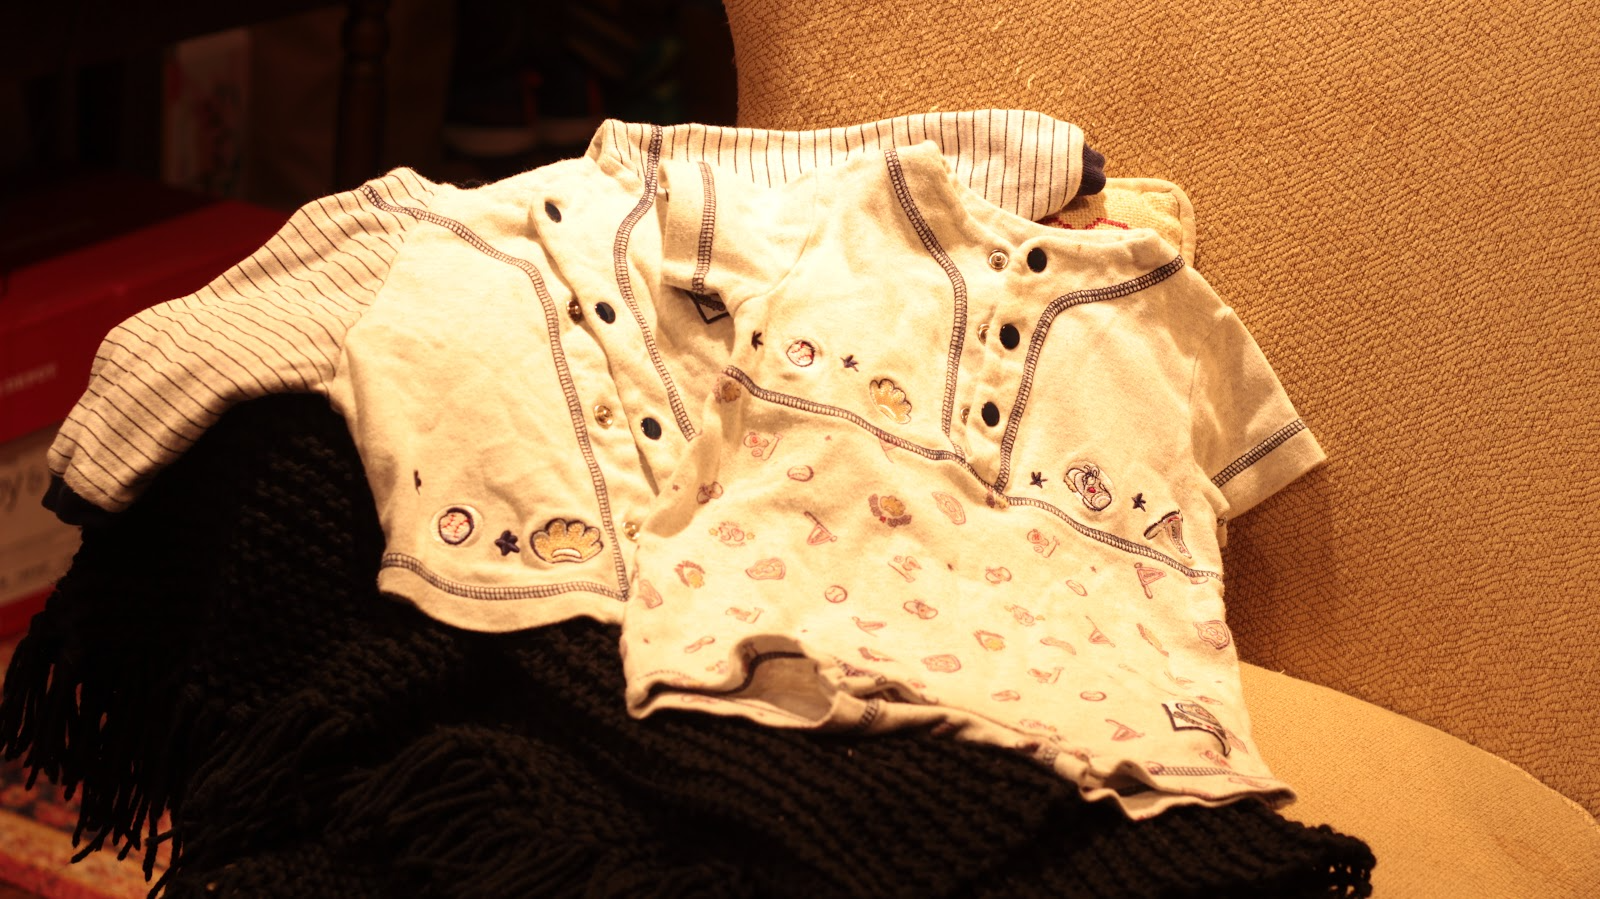 A set of PJs for a 9 month old, the fabric printed with baseballs.